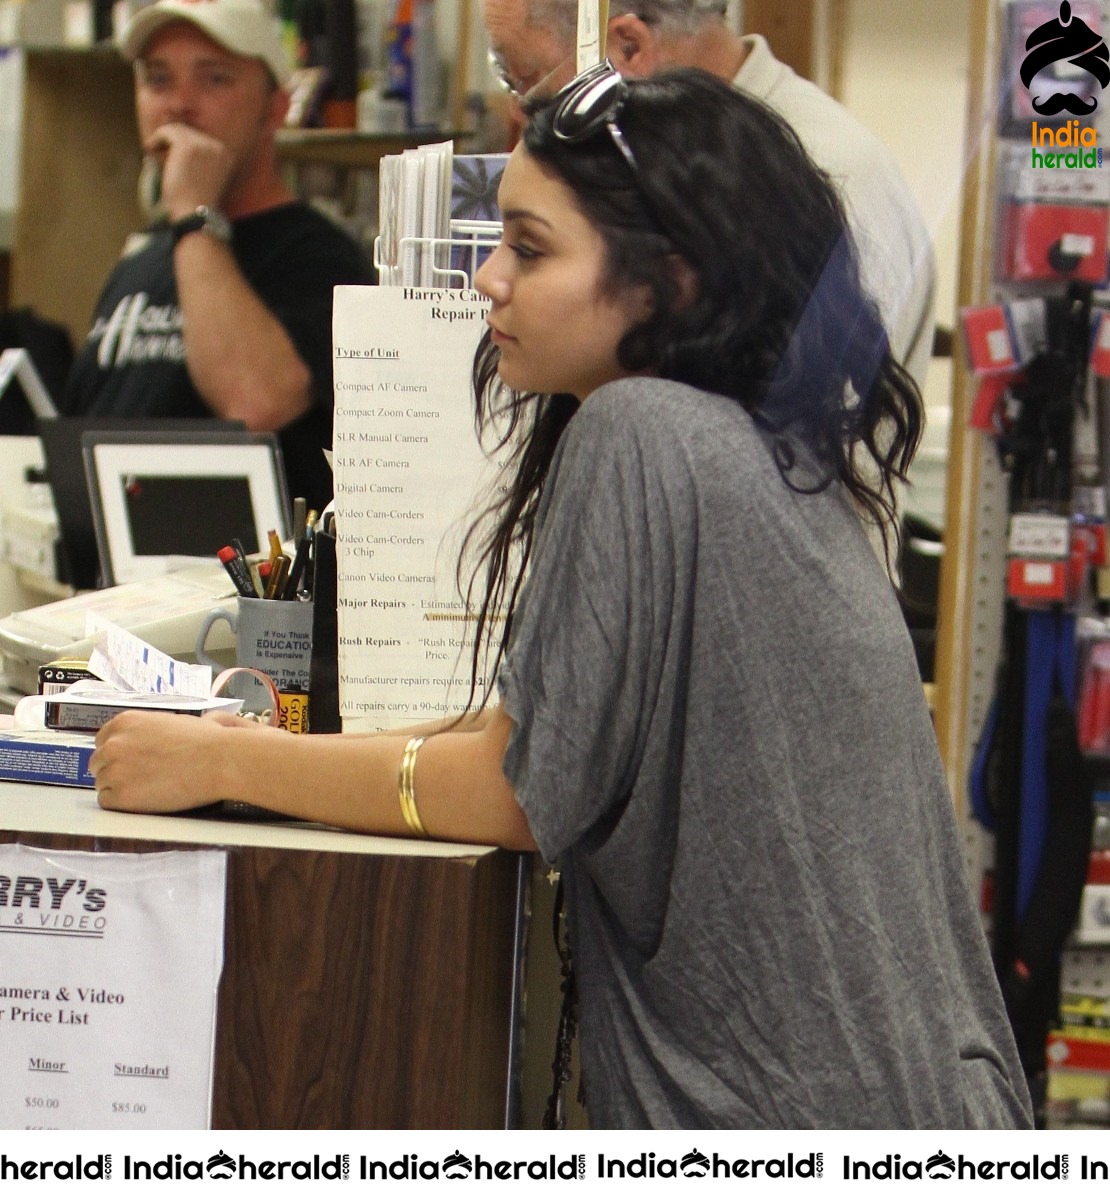 Vanessa Hudgens caught by Paparazzi while shopping